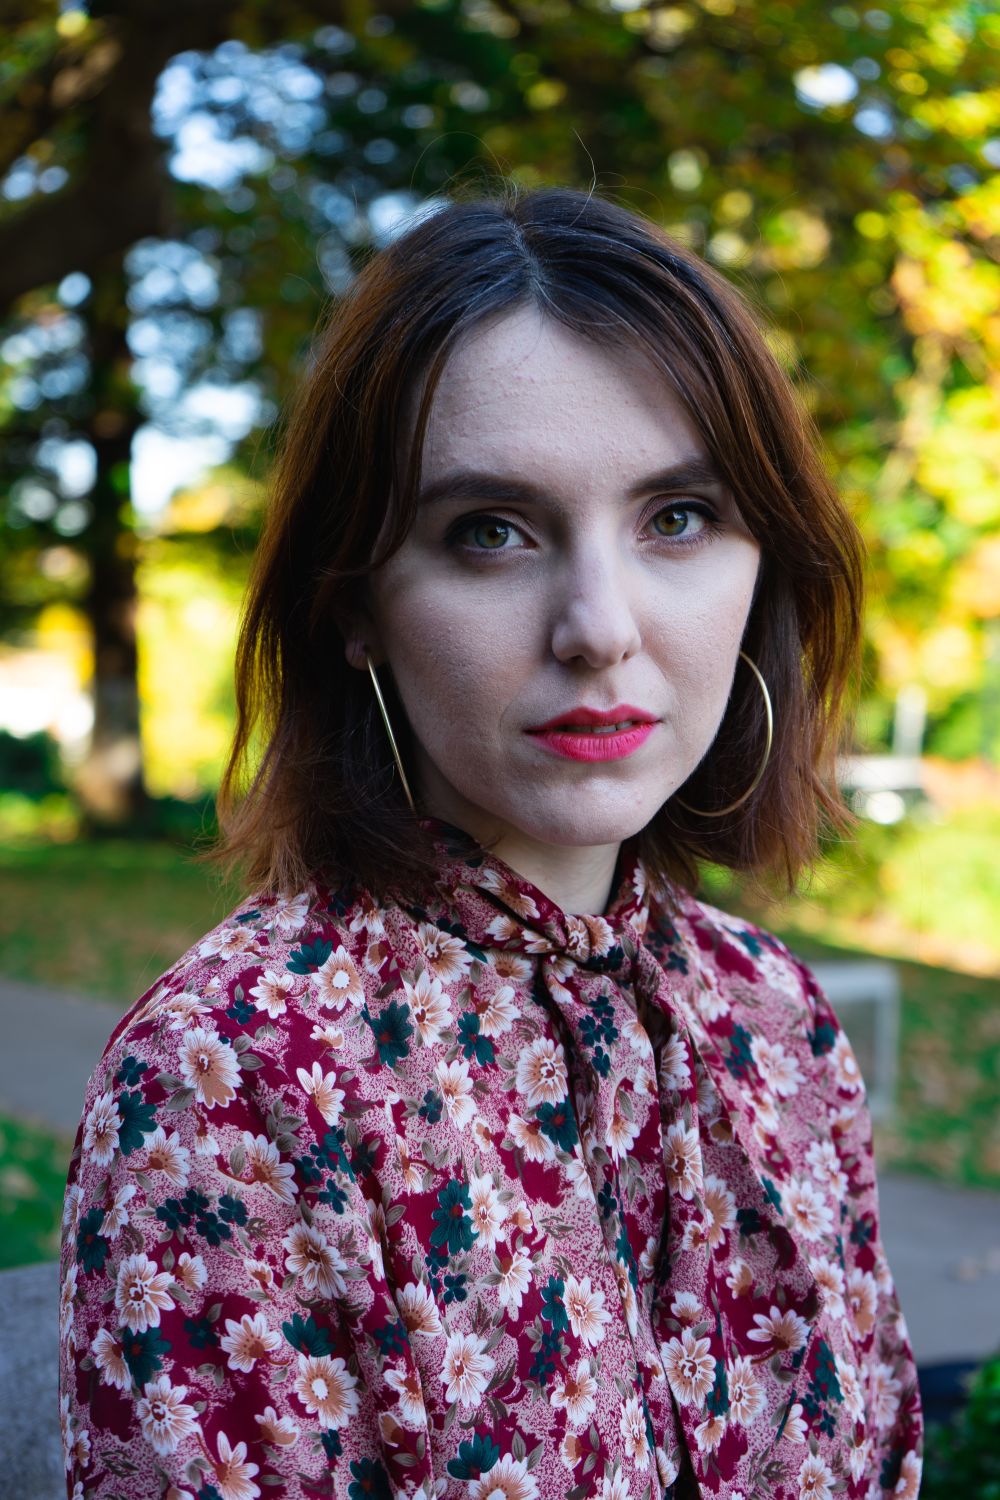 The picture is a headshot photo of Tash Atkins who has fair skin and shoulder-length brown hair. They are wearing a floral blouse with a red background and flowers in shades of pink and white. They are wearing large hoop earrings and are looking directly at the camera with a neutral expression. The background is an outdoor setting with green trees and a pathway on a sunny day.